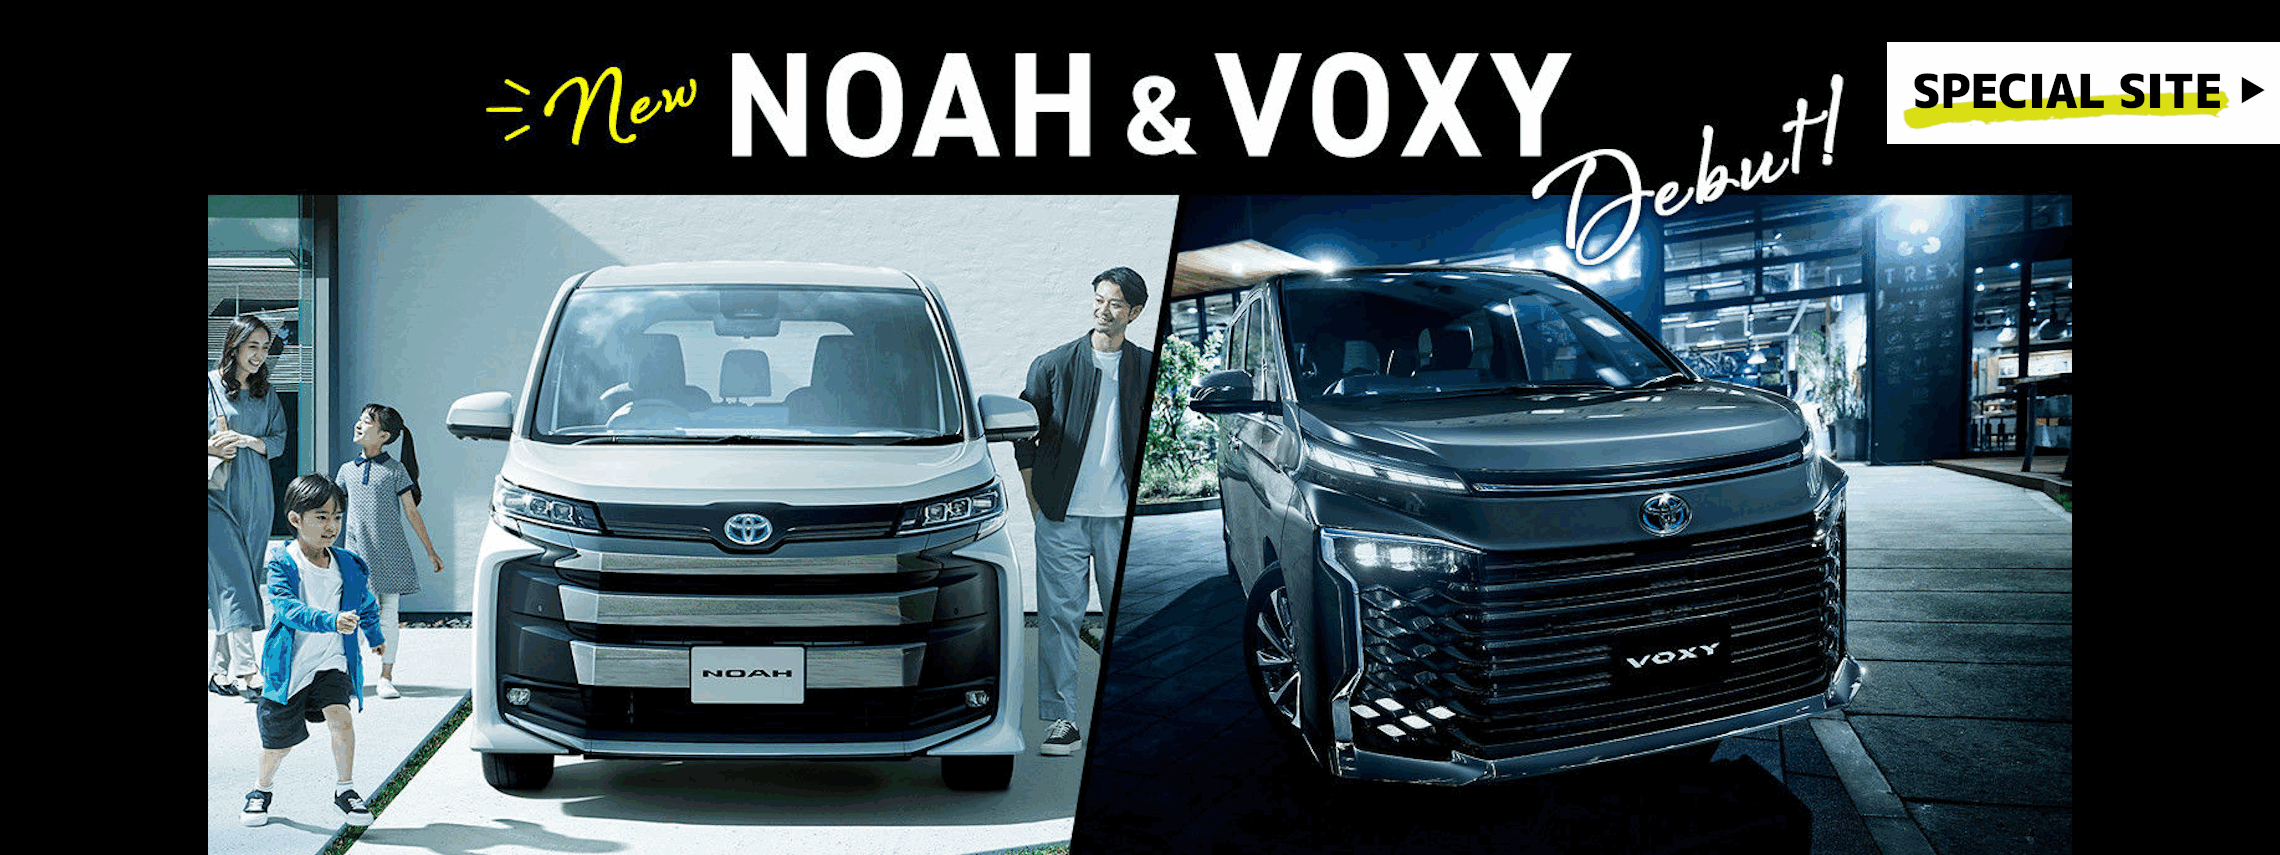 NEW NOAH&VOXY Debut! SPECIAL SITE